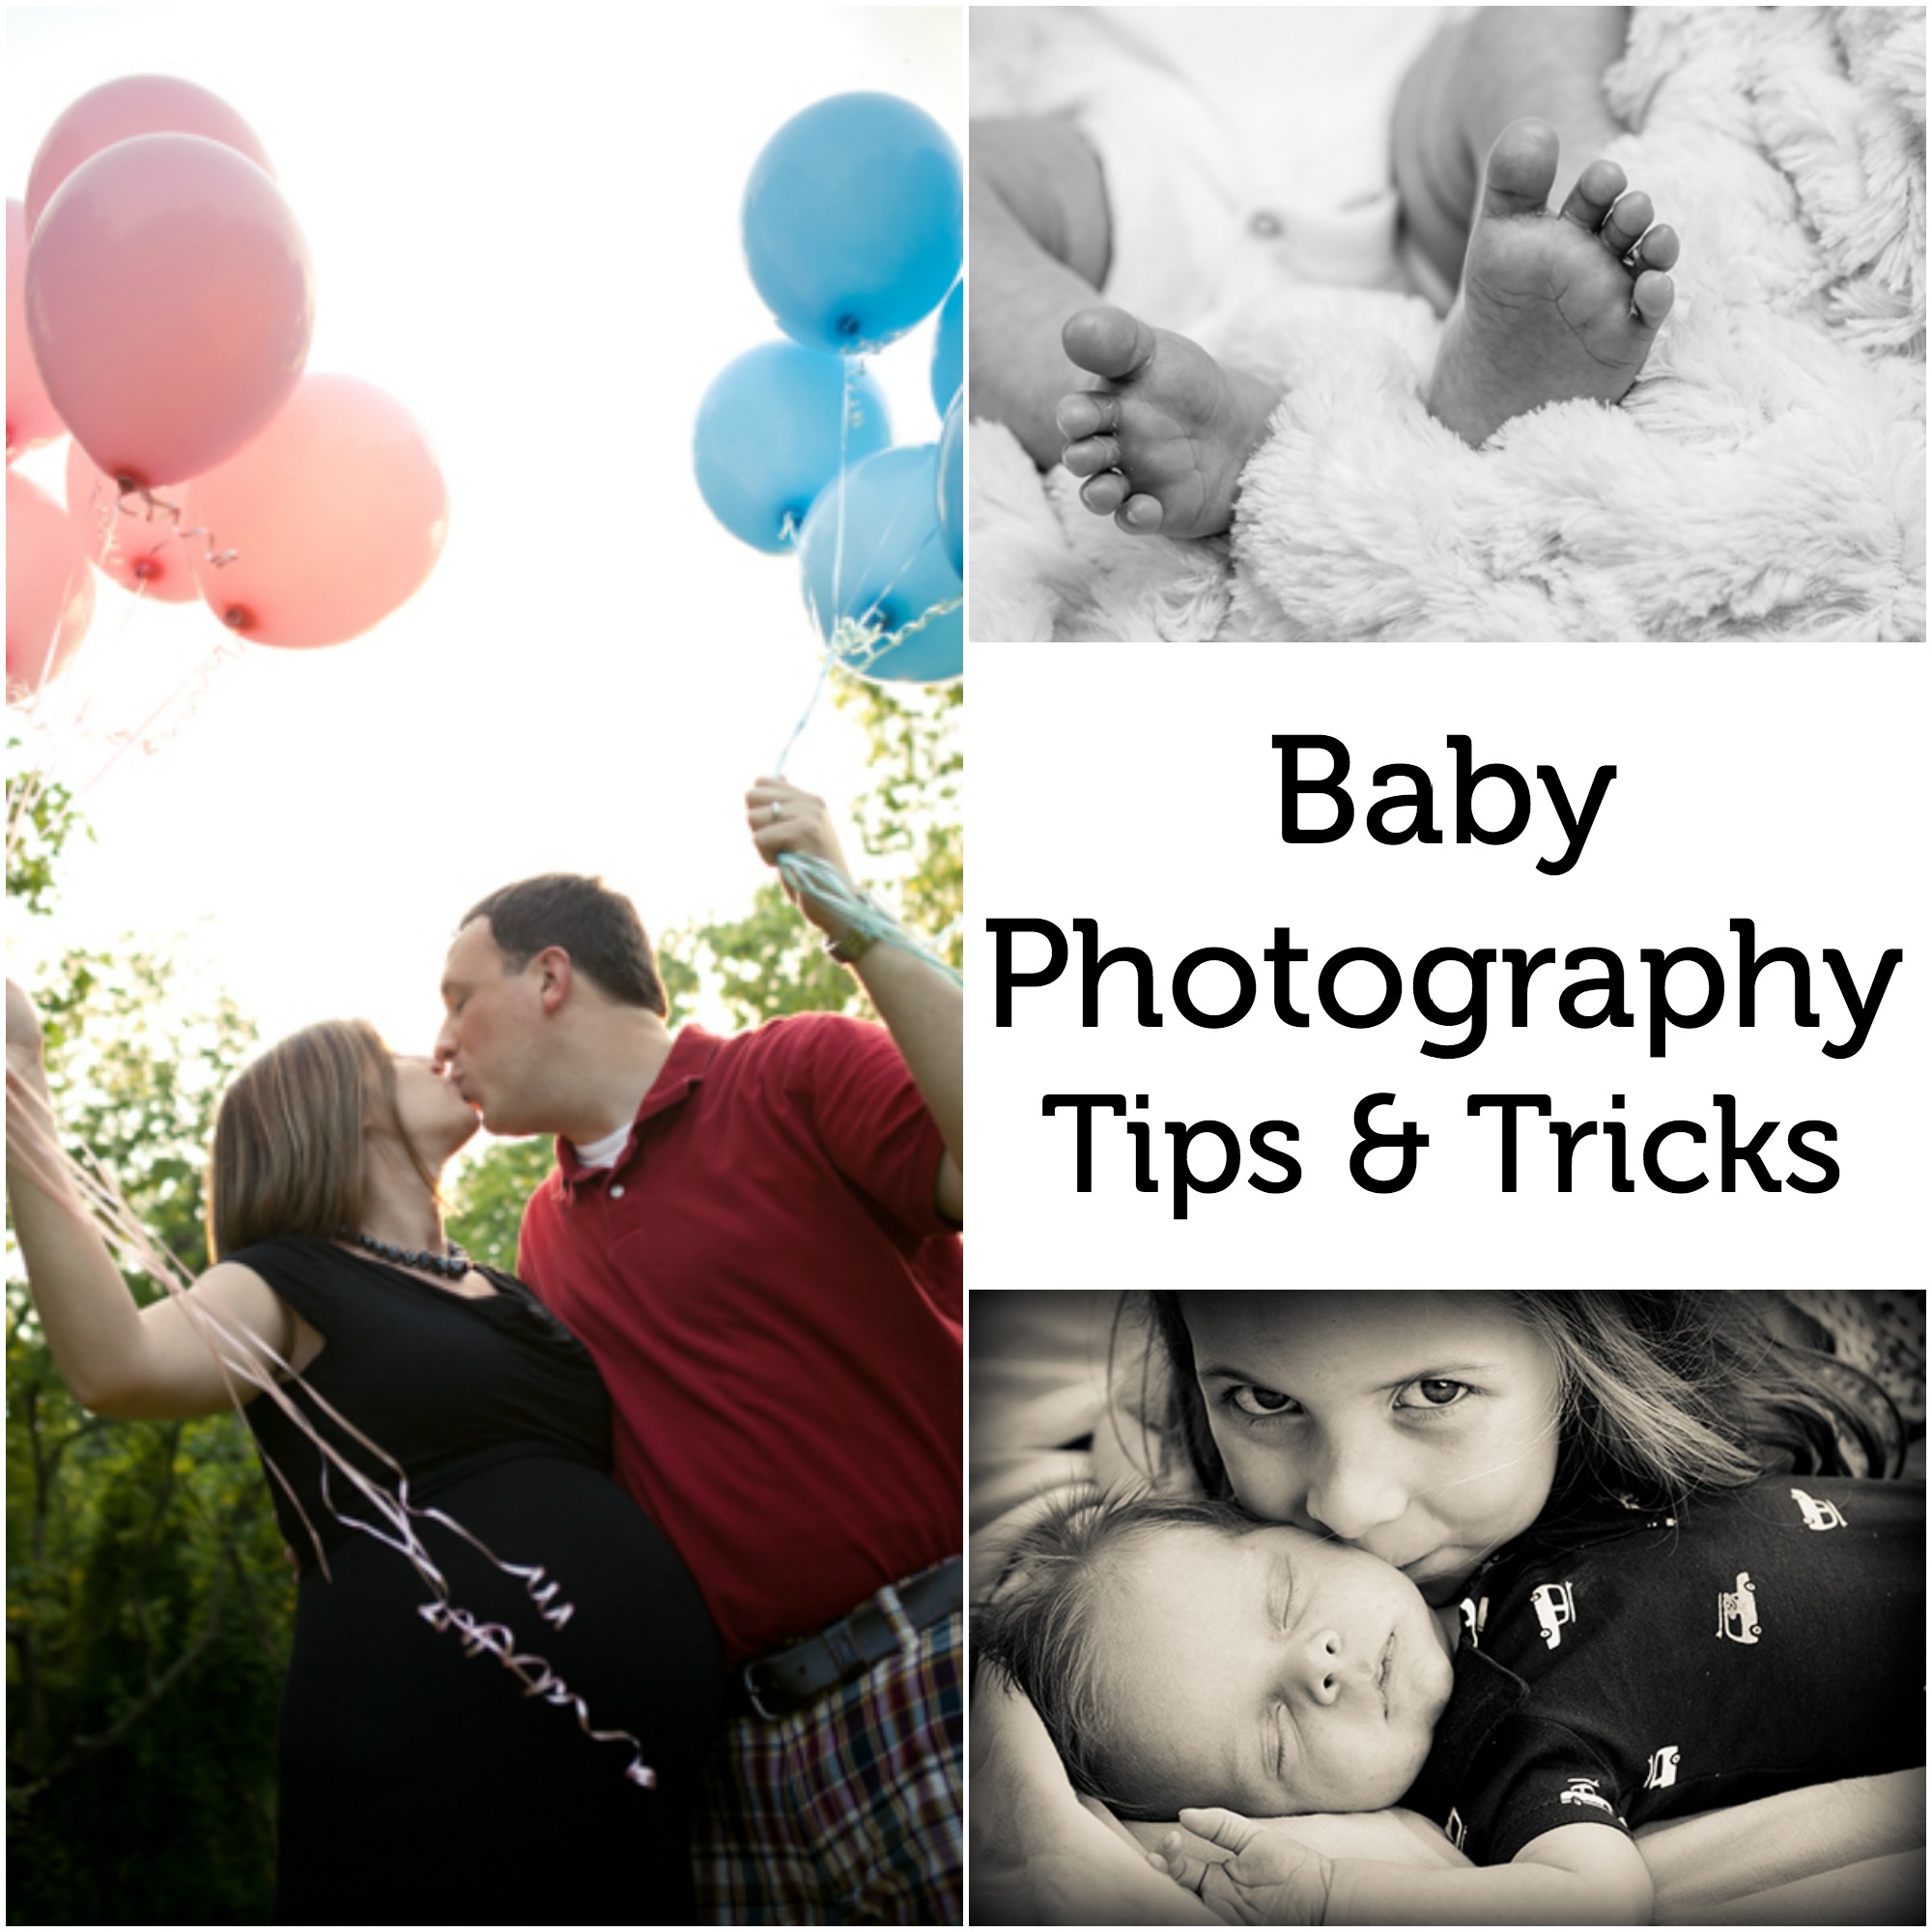 Baby Photography Tips and Tricks